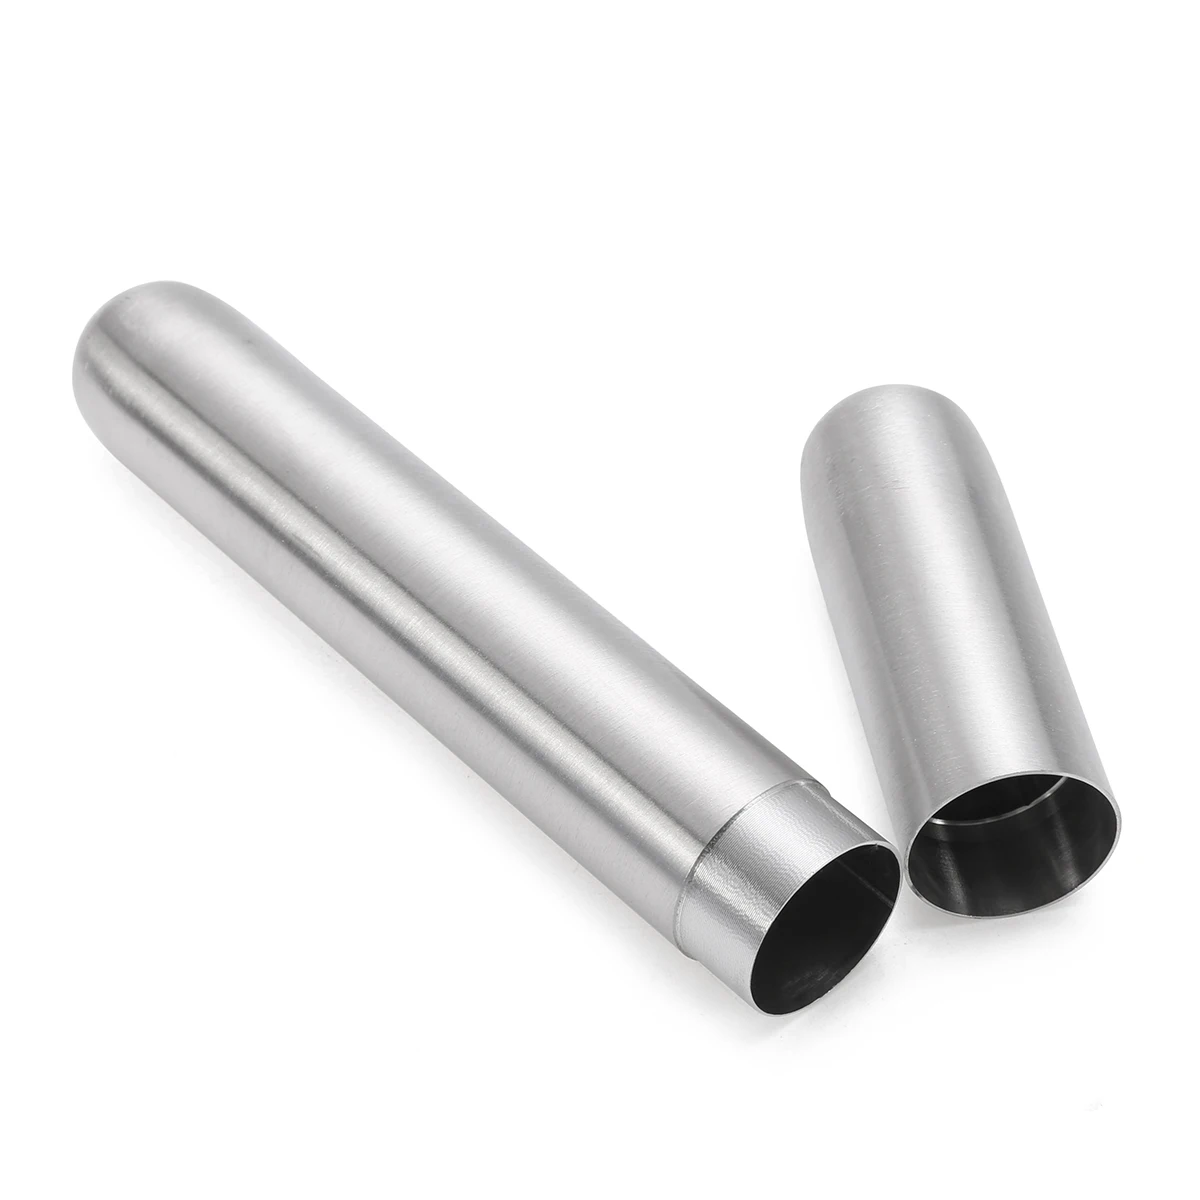 

Stainless Steel Cigar Tube Storage Case Portable Tobacco Cigarettes Holder For Smoking Cigar Accessories 17x2cm MAYITR